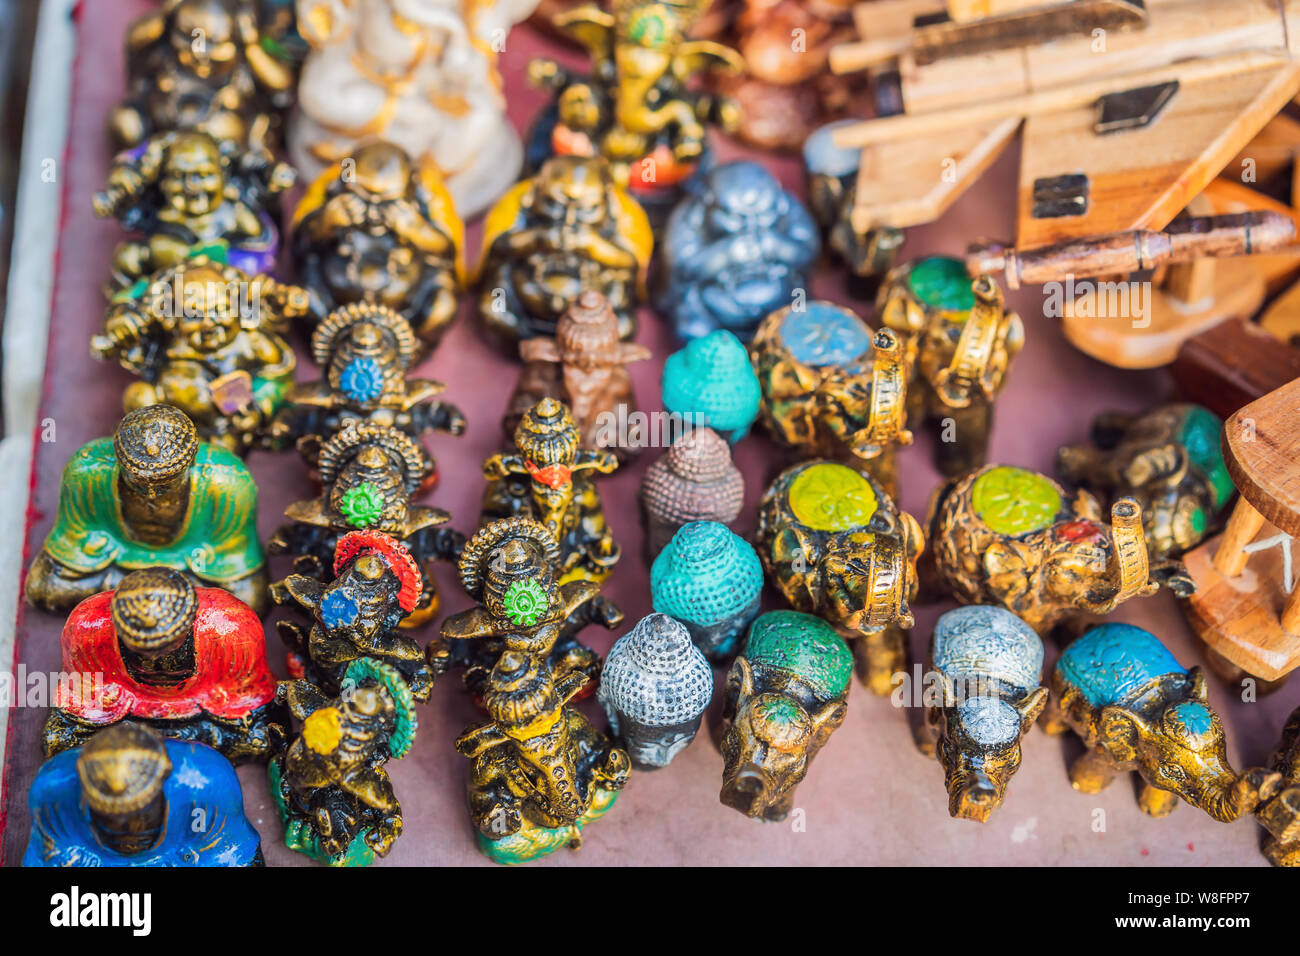 Typical souvenir shop selling souvenirs and handicrafts of Bali at the  famous Ubud Market, Indonesia. Balinese market. Souvenirs of wood and  crafts of Stock Photo - Alamy